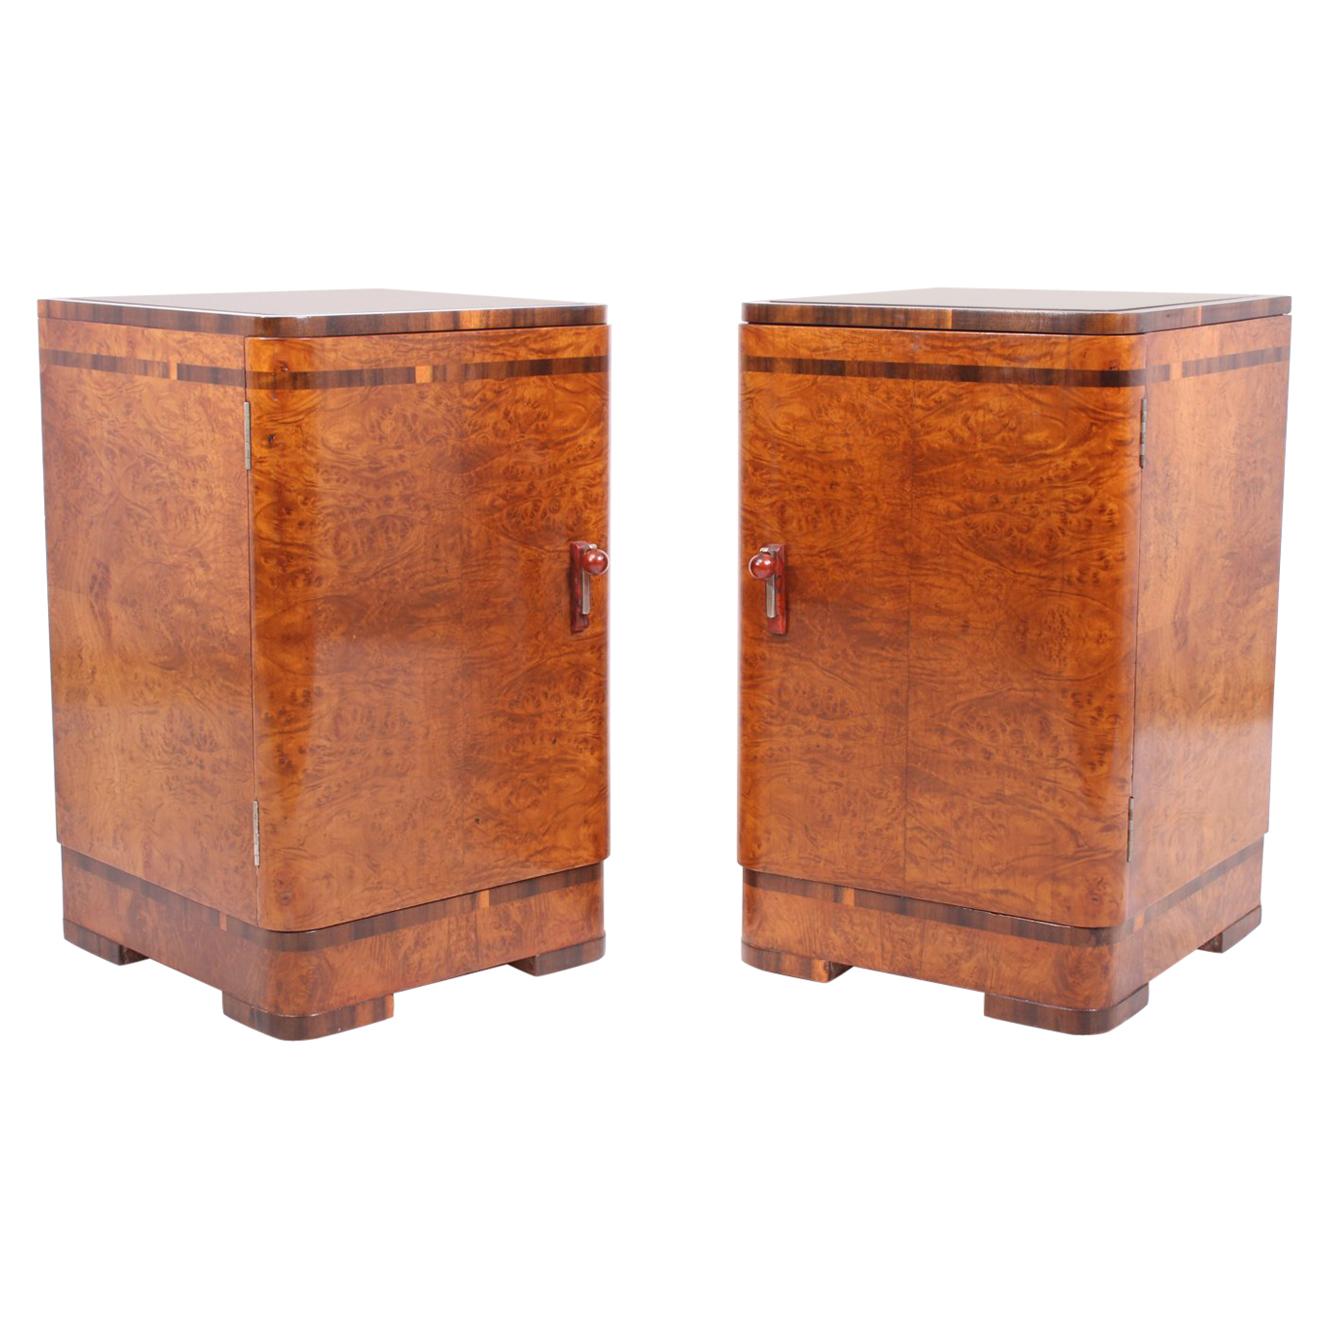 Pair of Art Deco Bedside Cabinets in Burr Maple